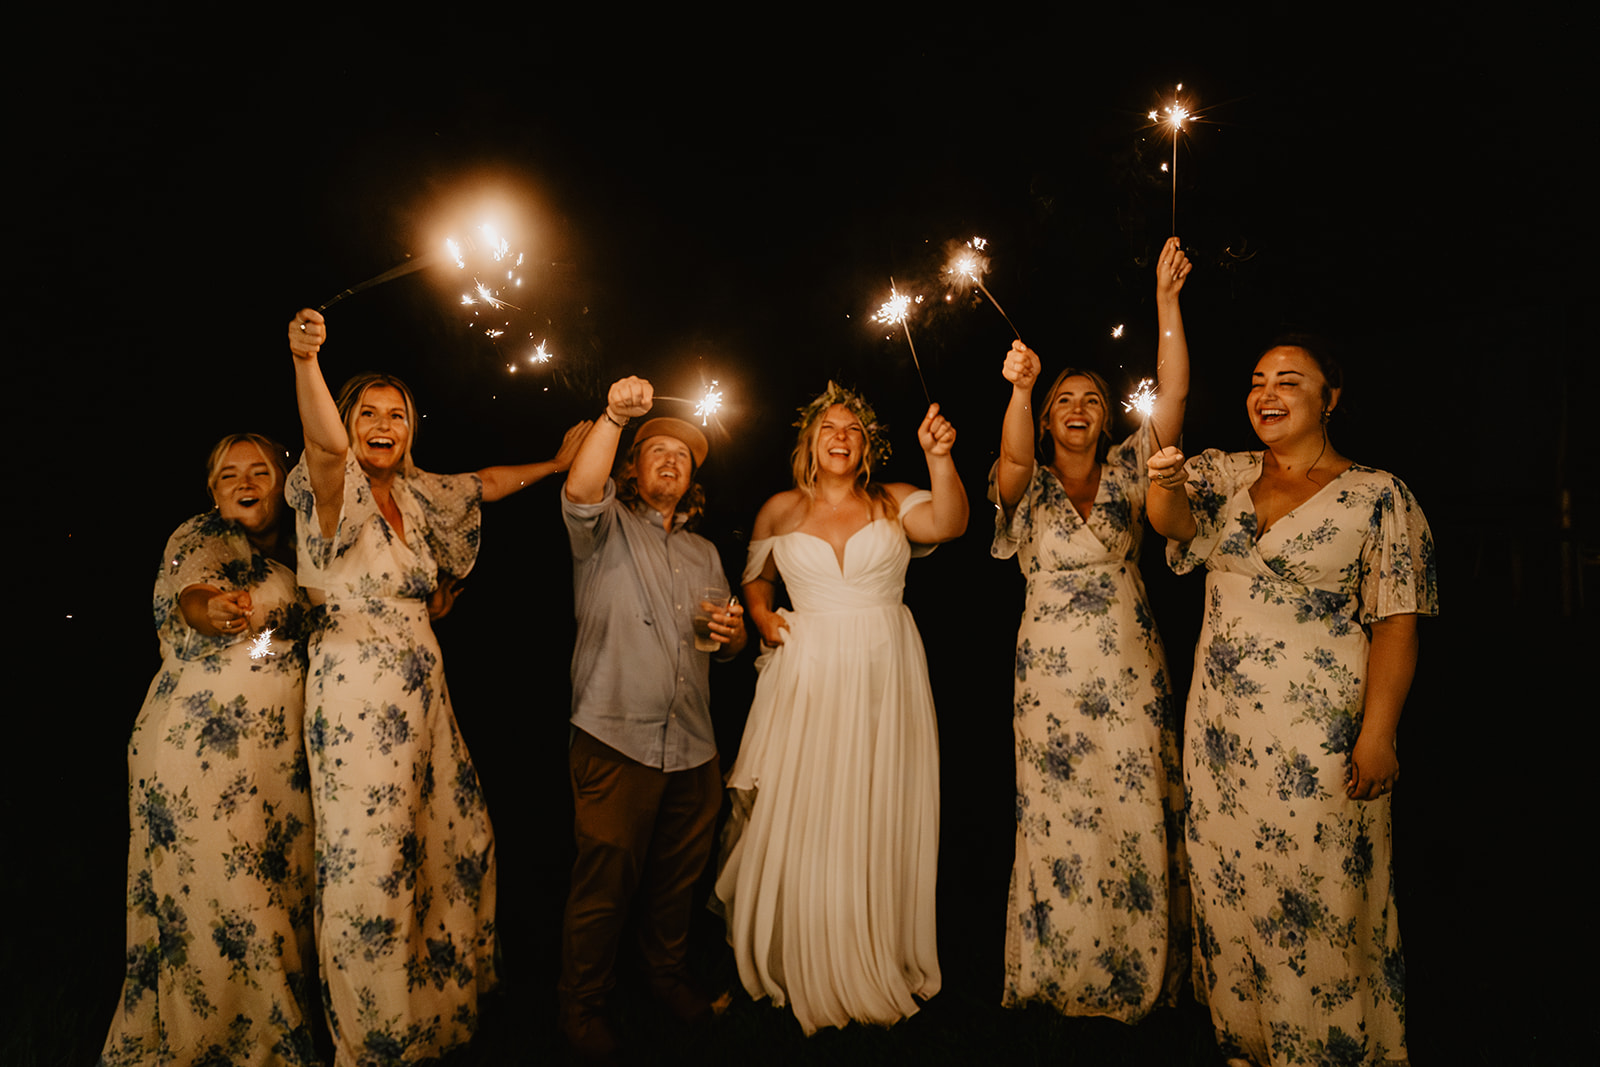 Bride and Groom sparklers at a wedding at Mac's Farm in Sussex. By OliveJoy Photography.